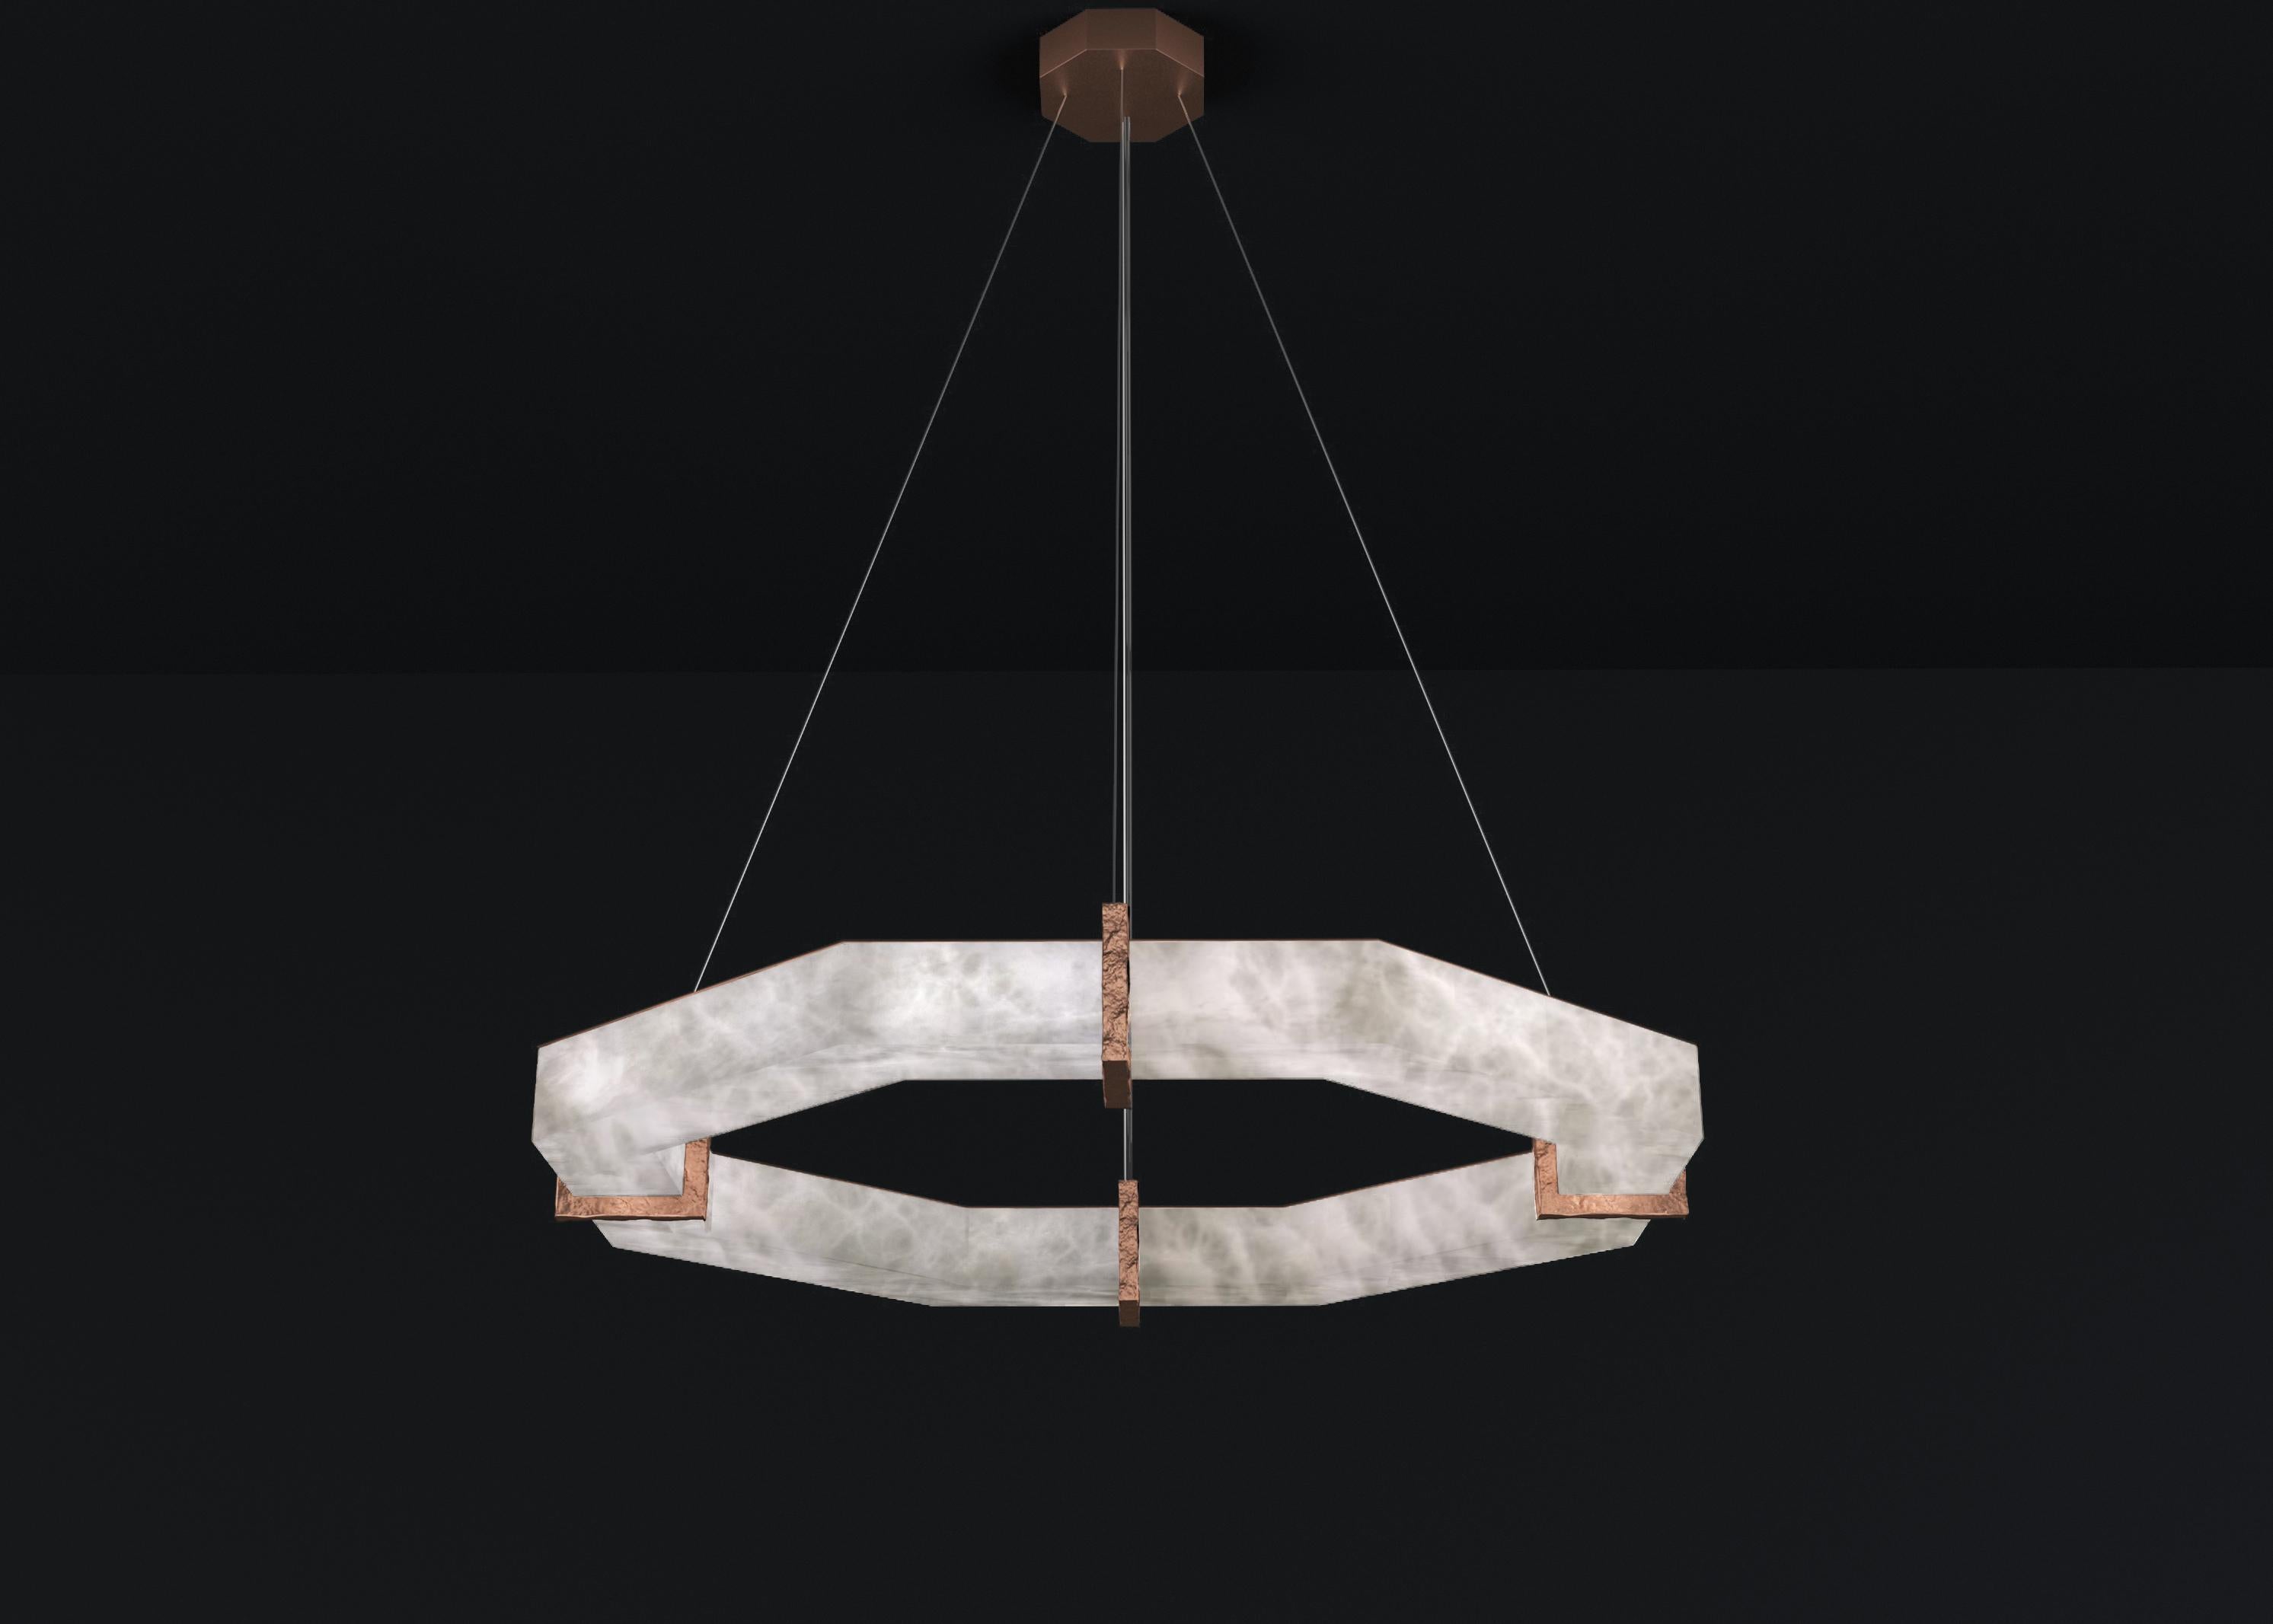 Efesto Copper Pendant Lamp by Alabastro Italiano
Dimensions: D 83 x W 80 x H 11 cm.
Materials: White alabaster and copper.

Available in different finishes: Shiny Silver, Bronze, Brushed Brass, Ruggine of Florence, Brushed Burnished, Shiny Gold,